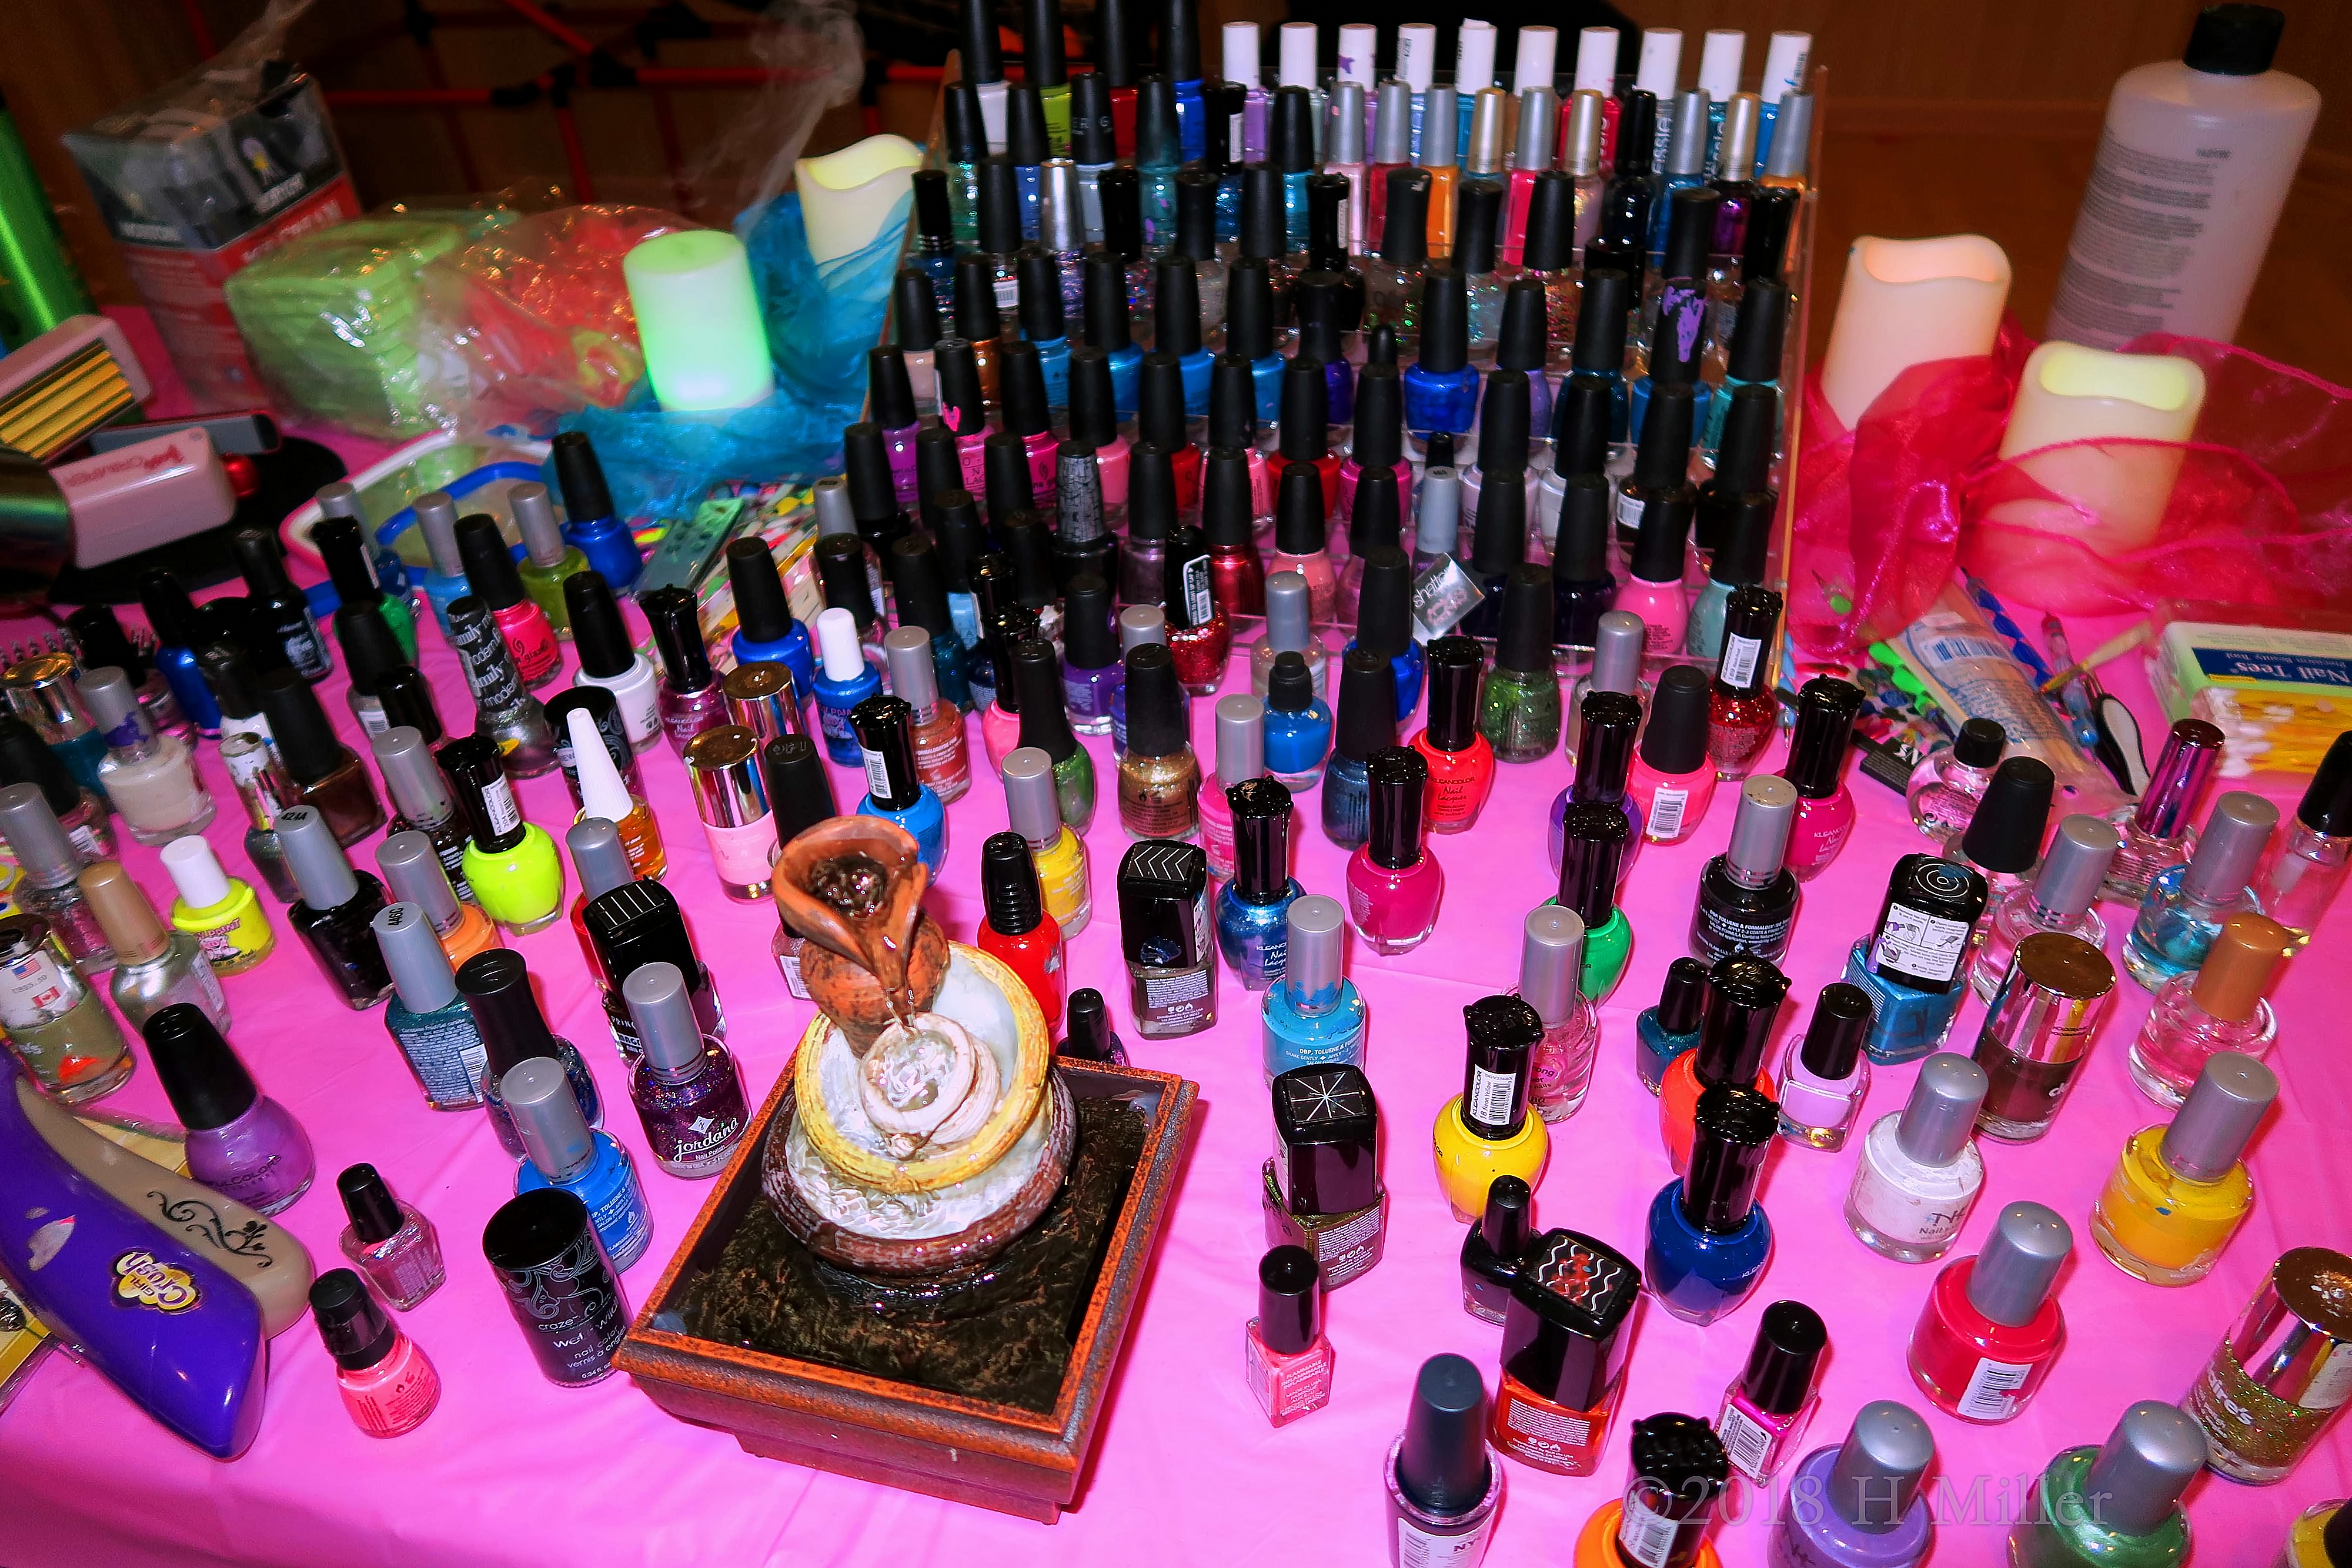 Manicure Station With A Wide Range Of Nail Color Collections At Amanda's Kids Spa Party! 